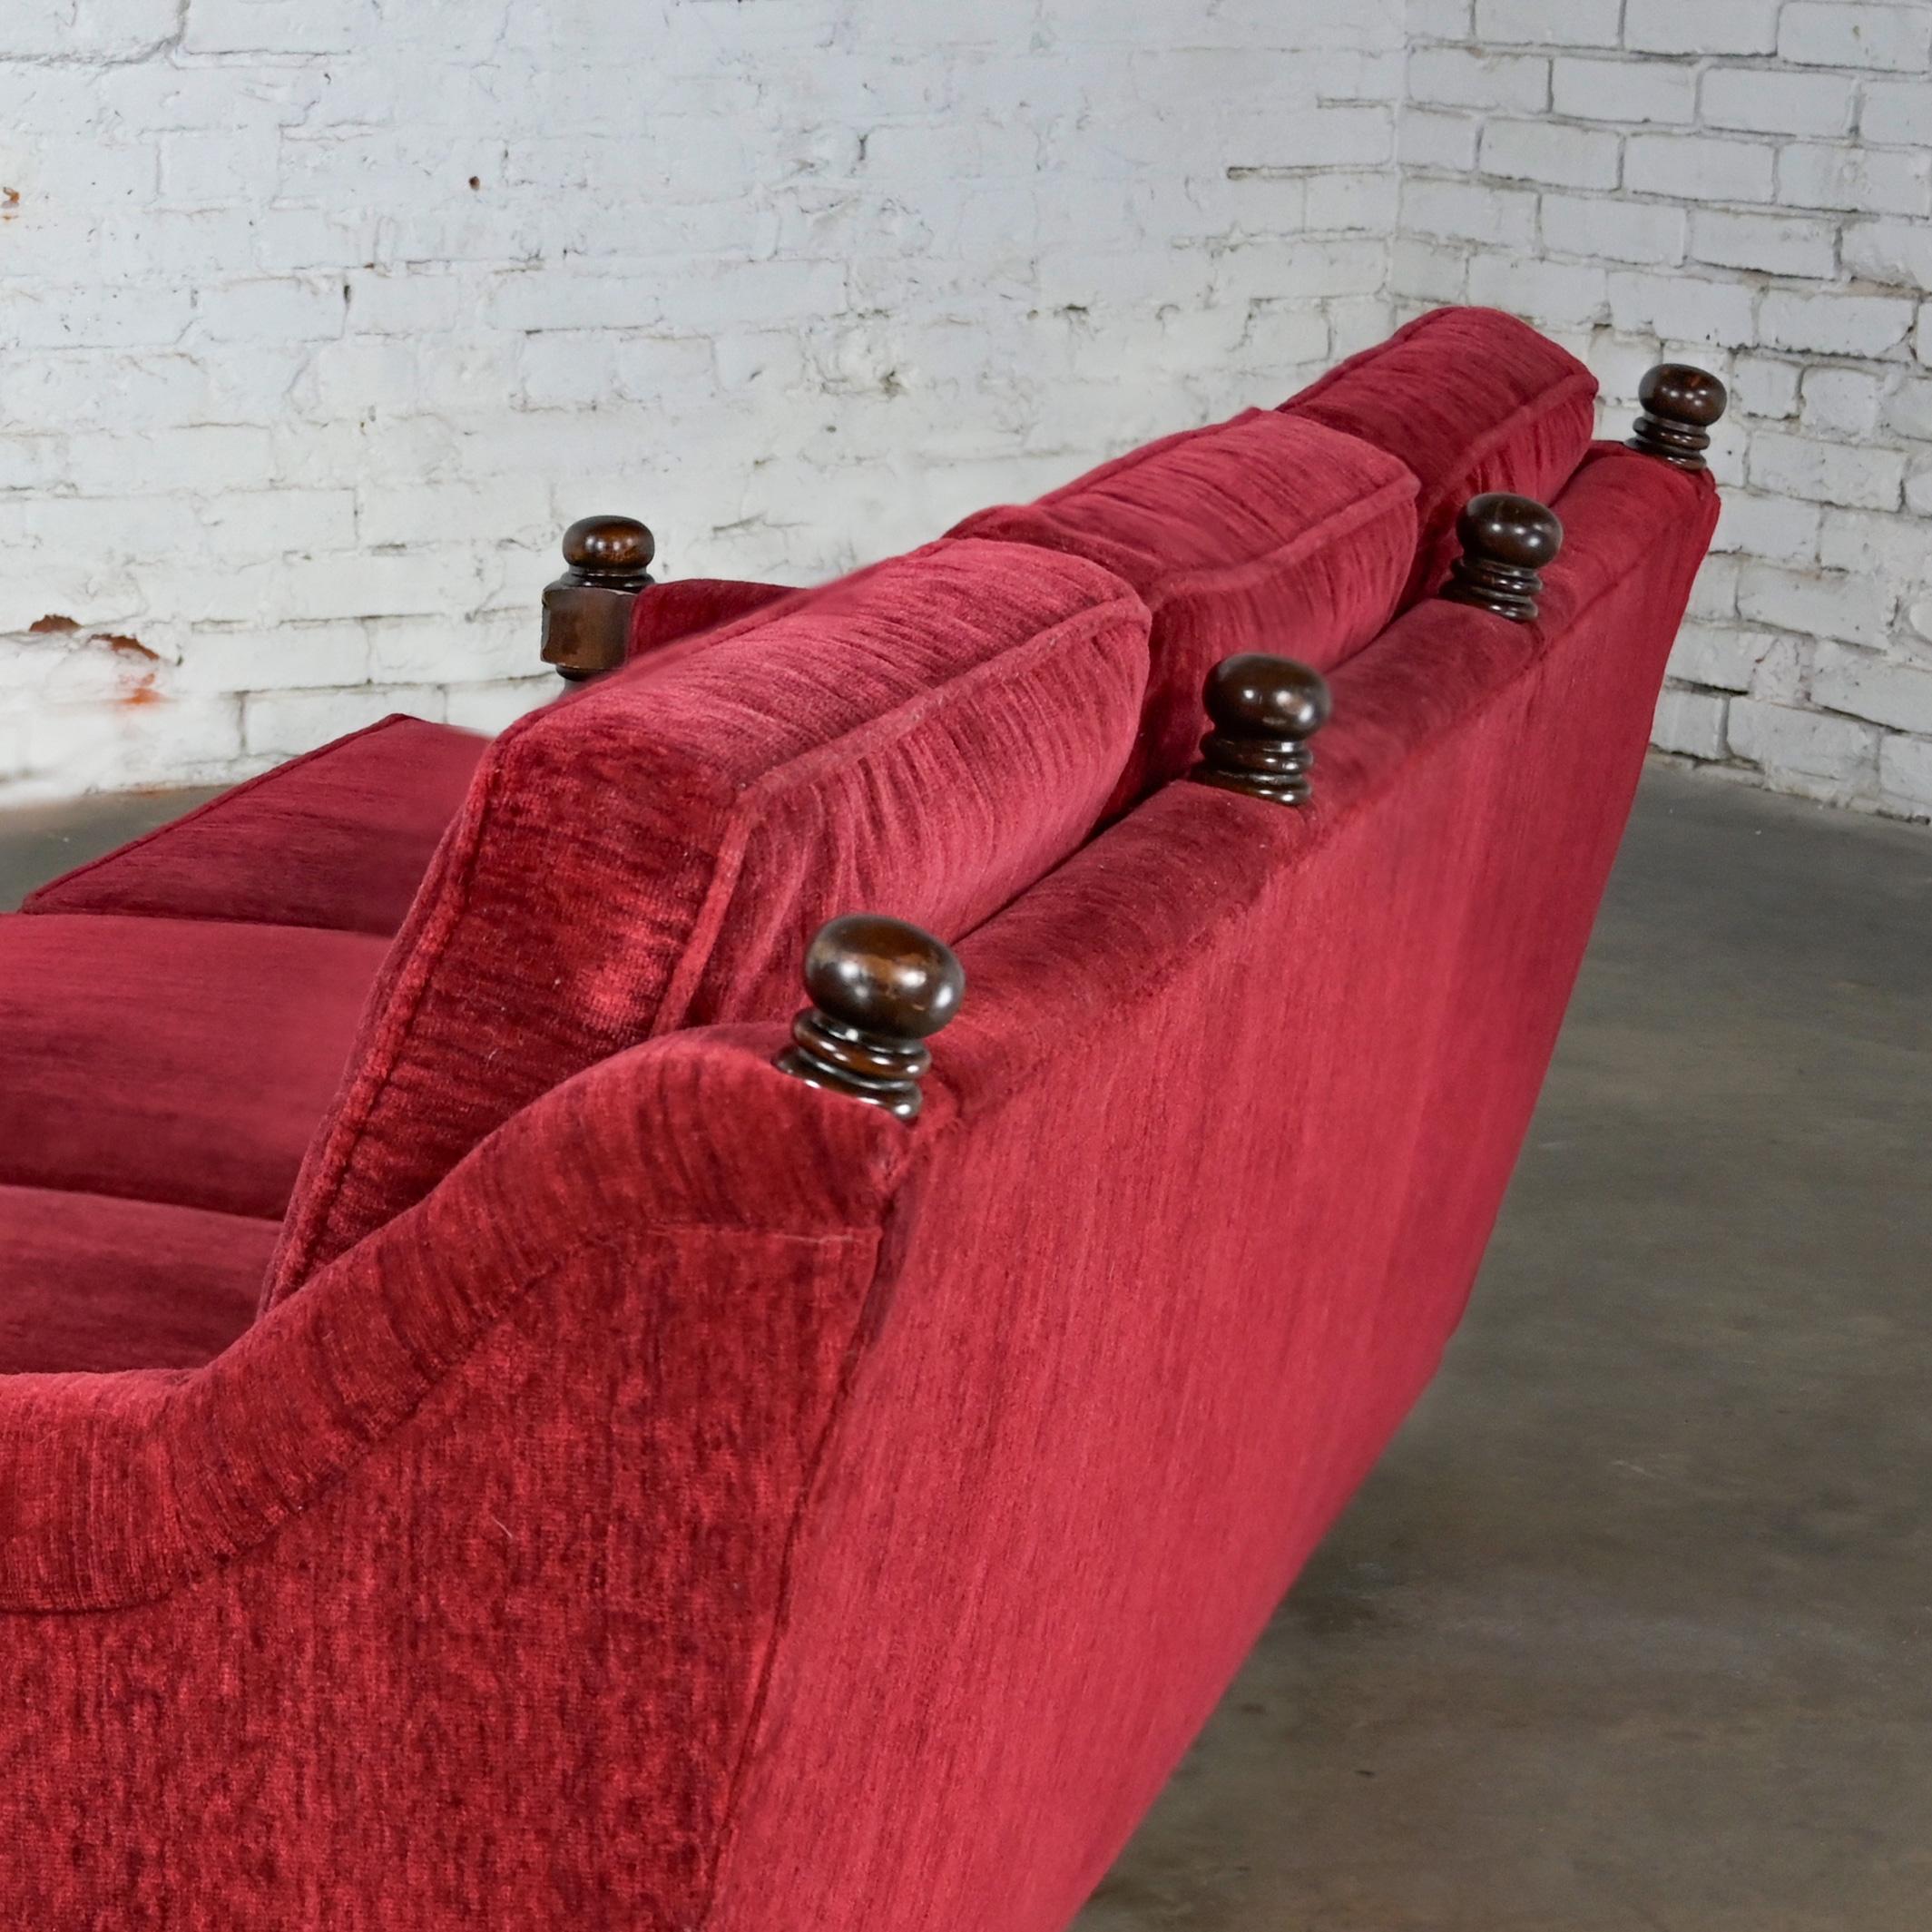 1970's Spanish Revival Rustic Red Chenille Sofa Style Artes De Mexico Internls In Good Condition For Sale In Topeka, KS